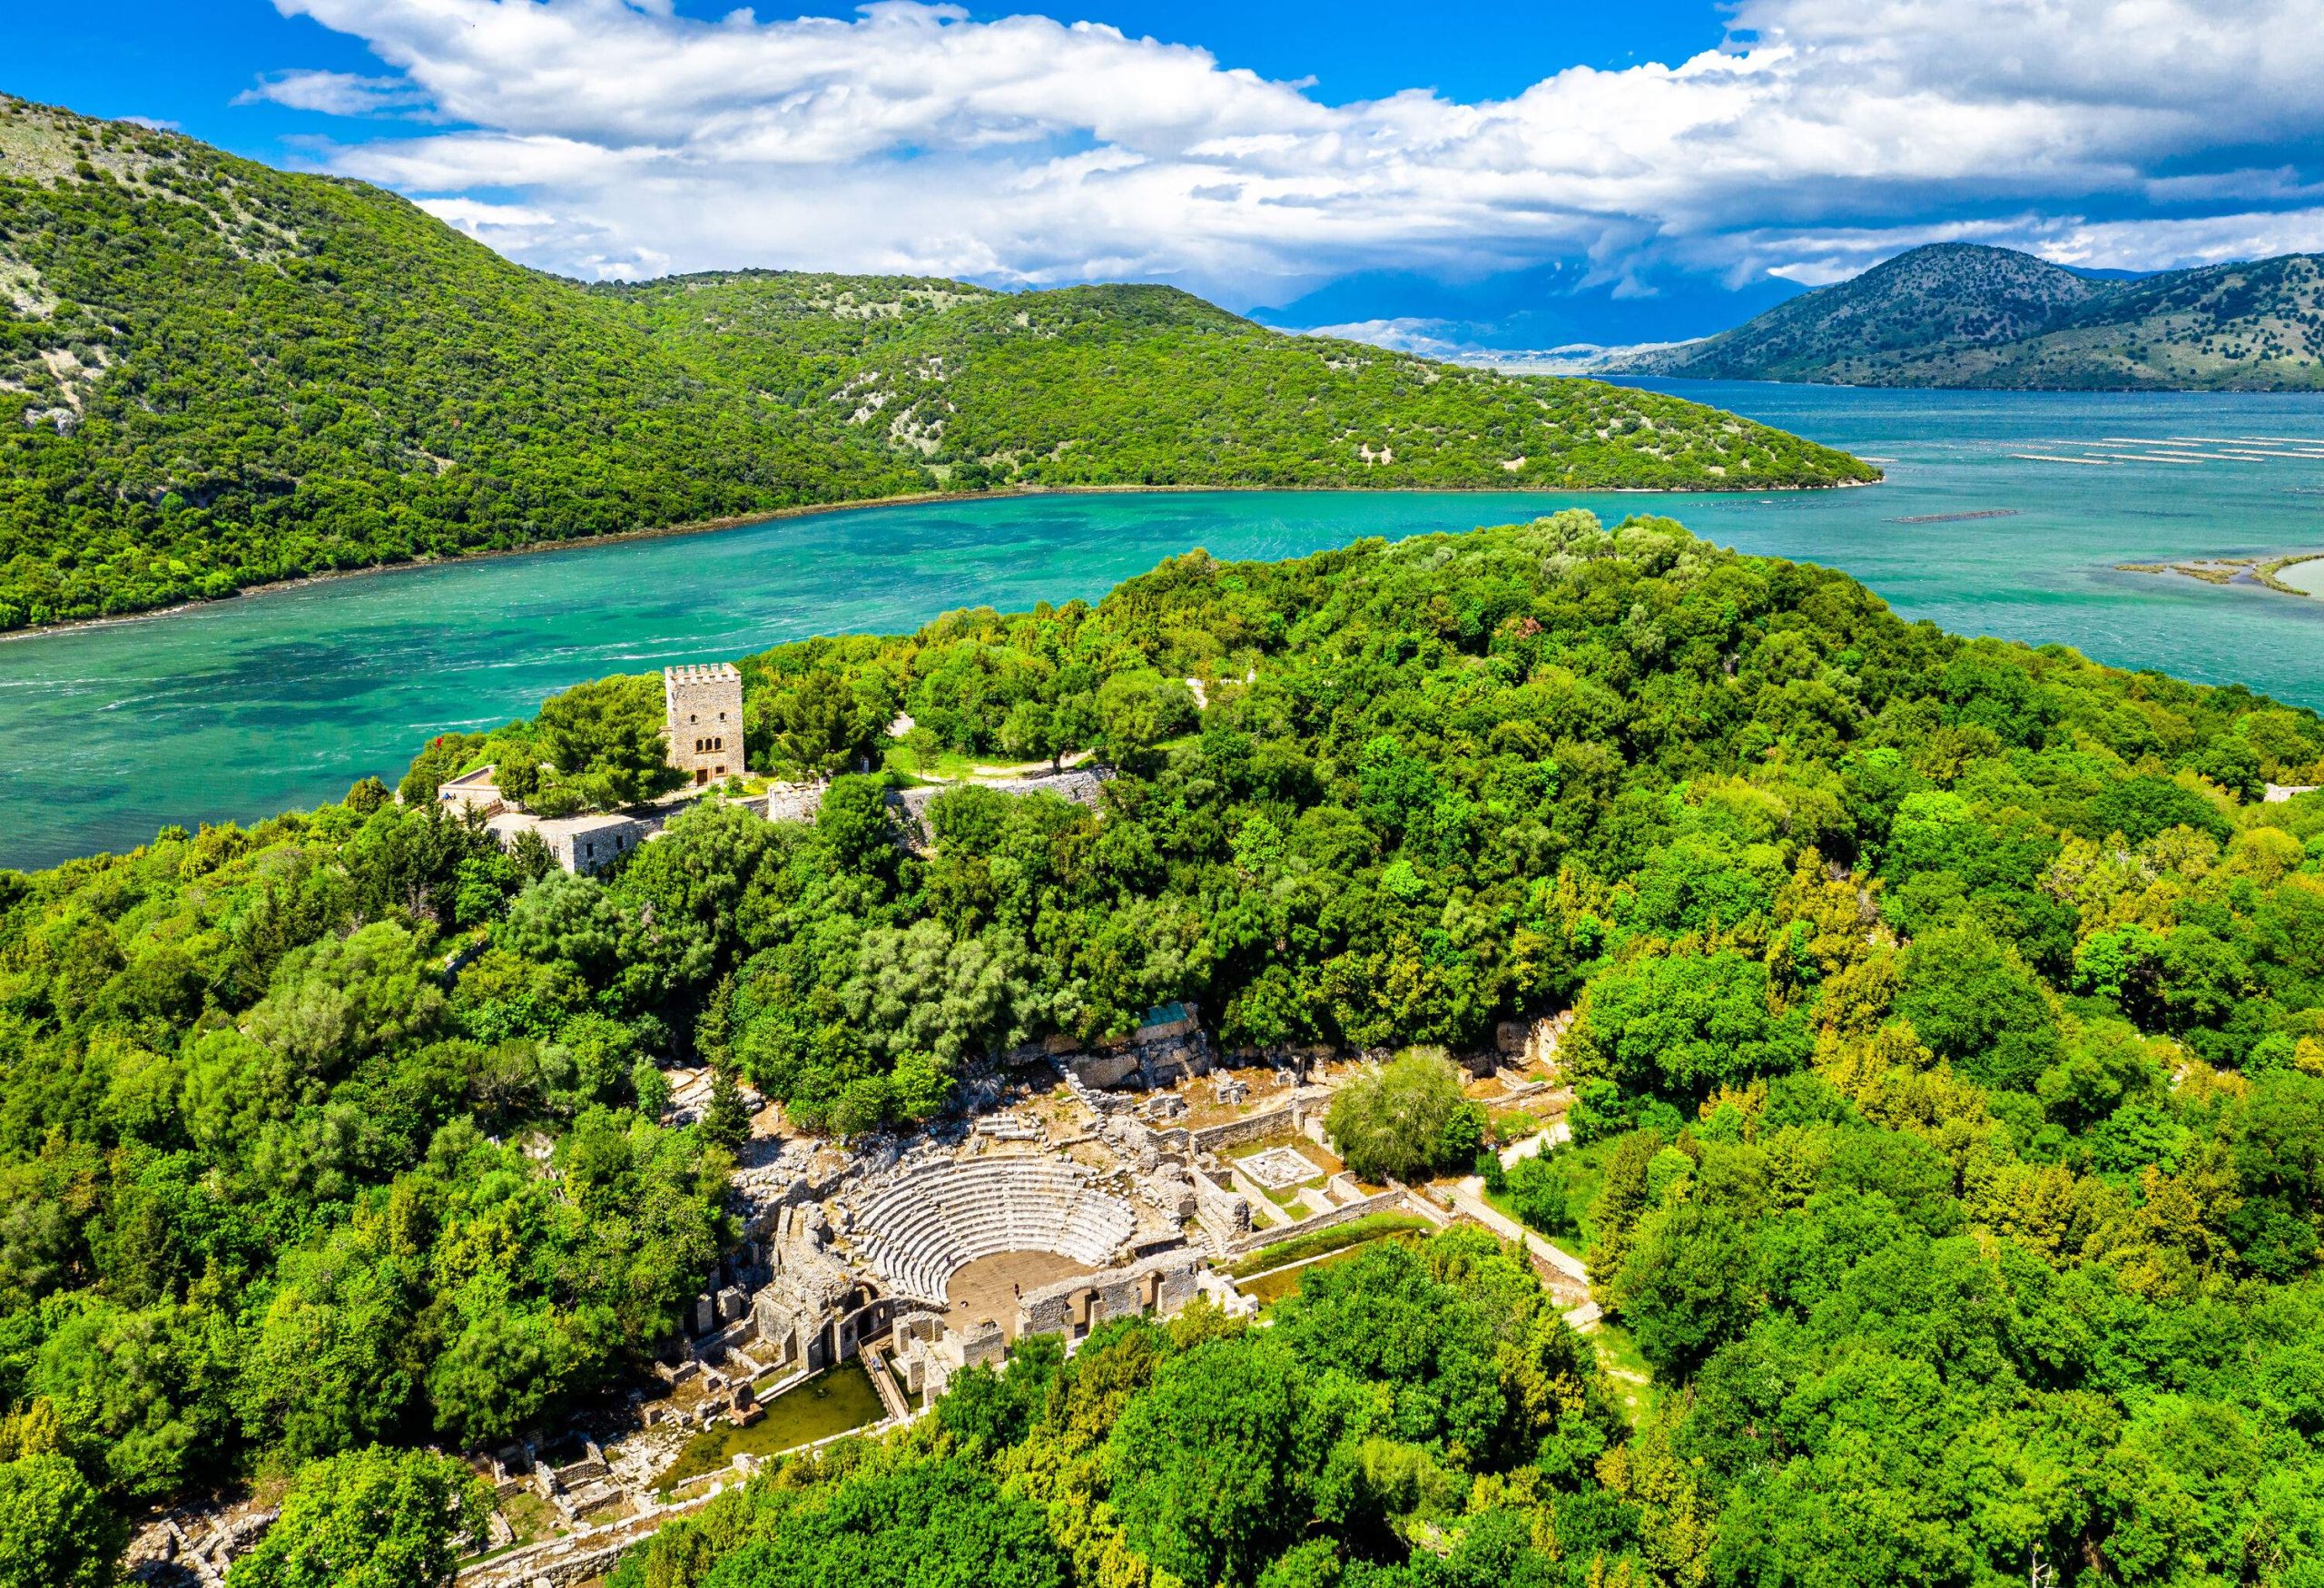 An archaeological site with ruins of ancient buildings and amphitheatre surrounded by a dense forest beside a lake.